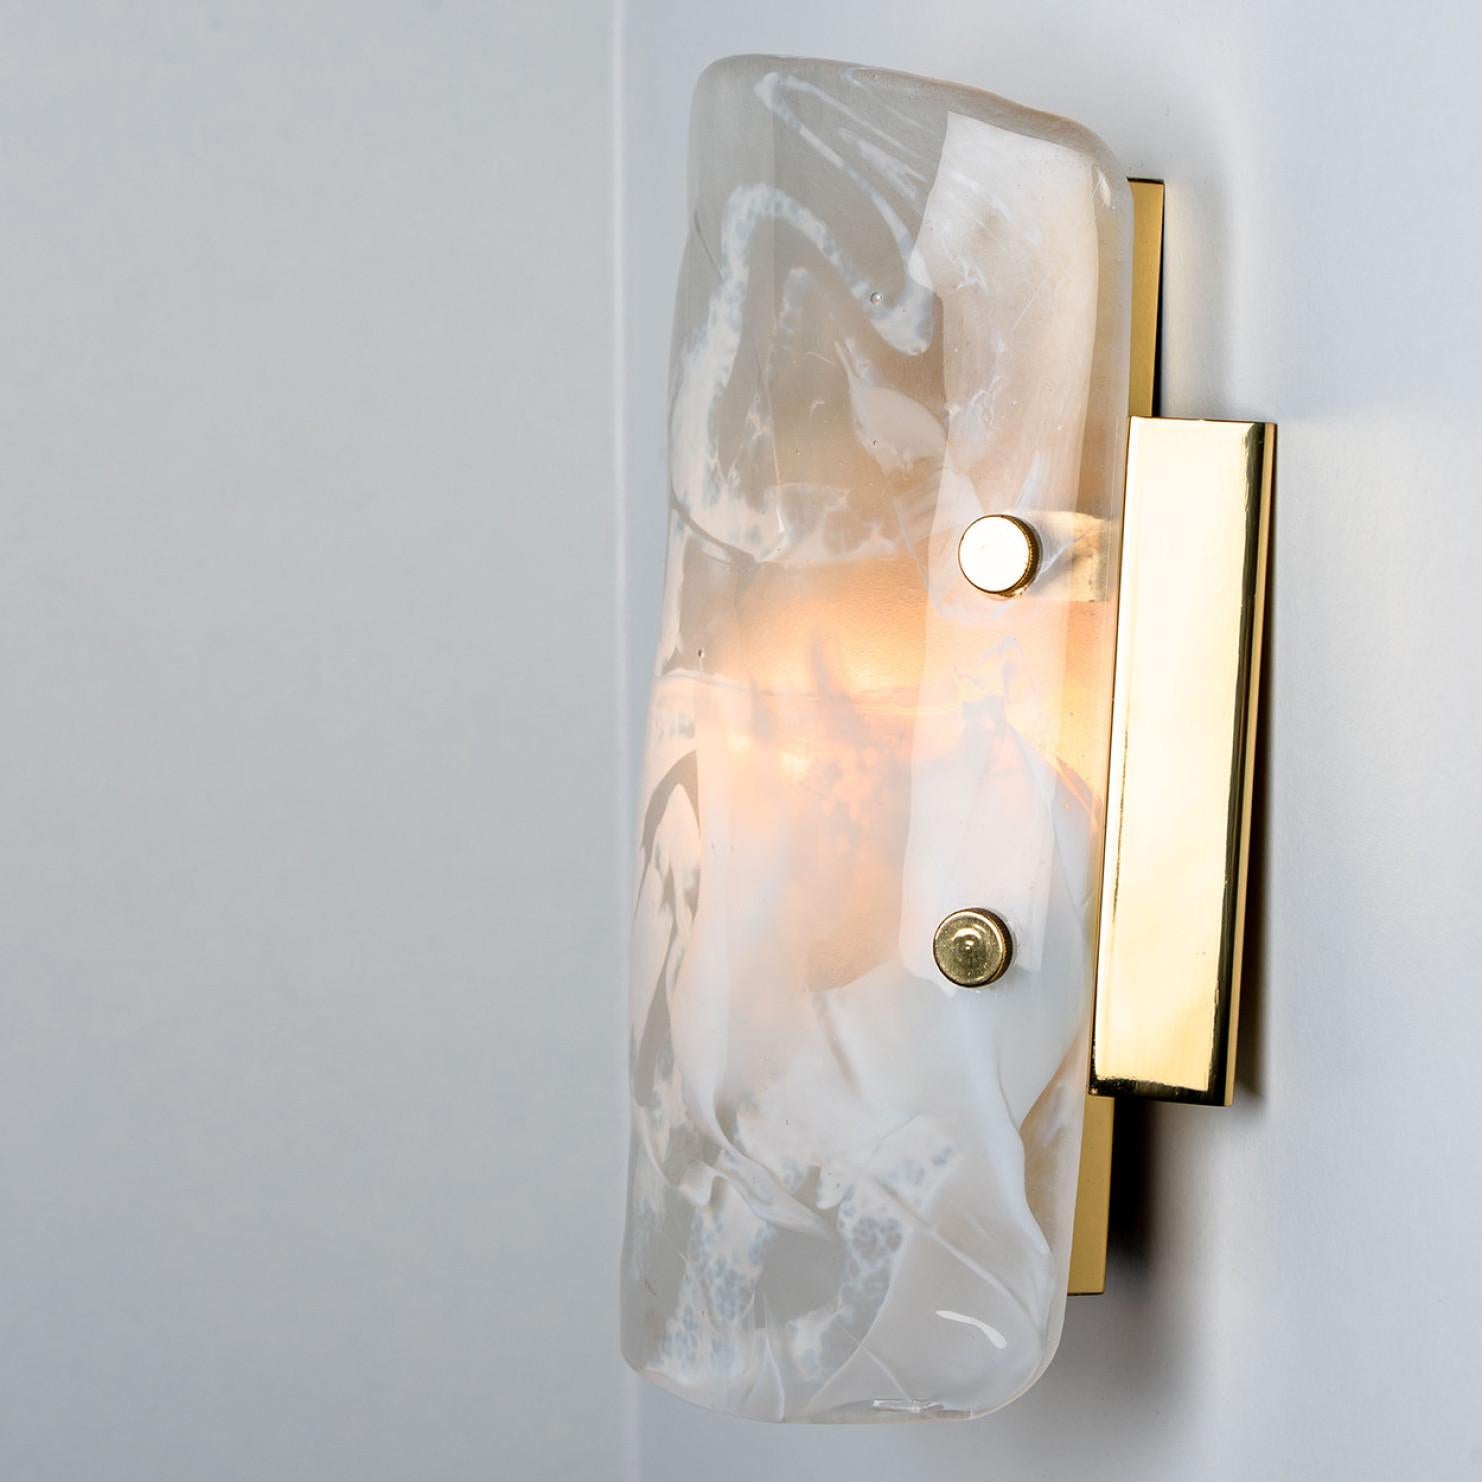 Brass Hillebrand Marble Murano Glass Wall Light Fixtures, 1960s For Sale